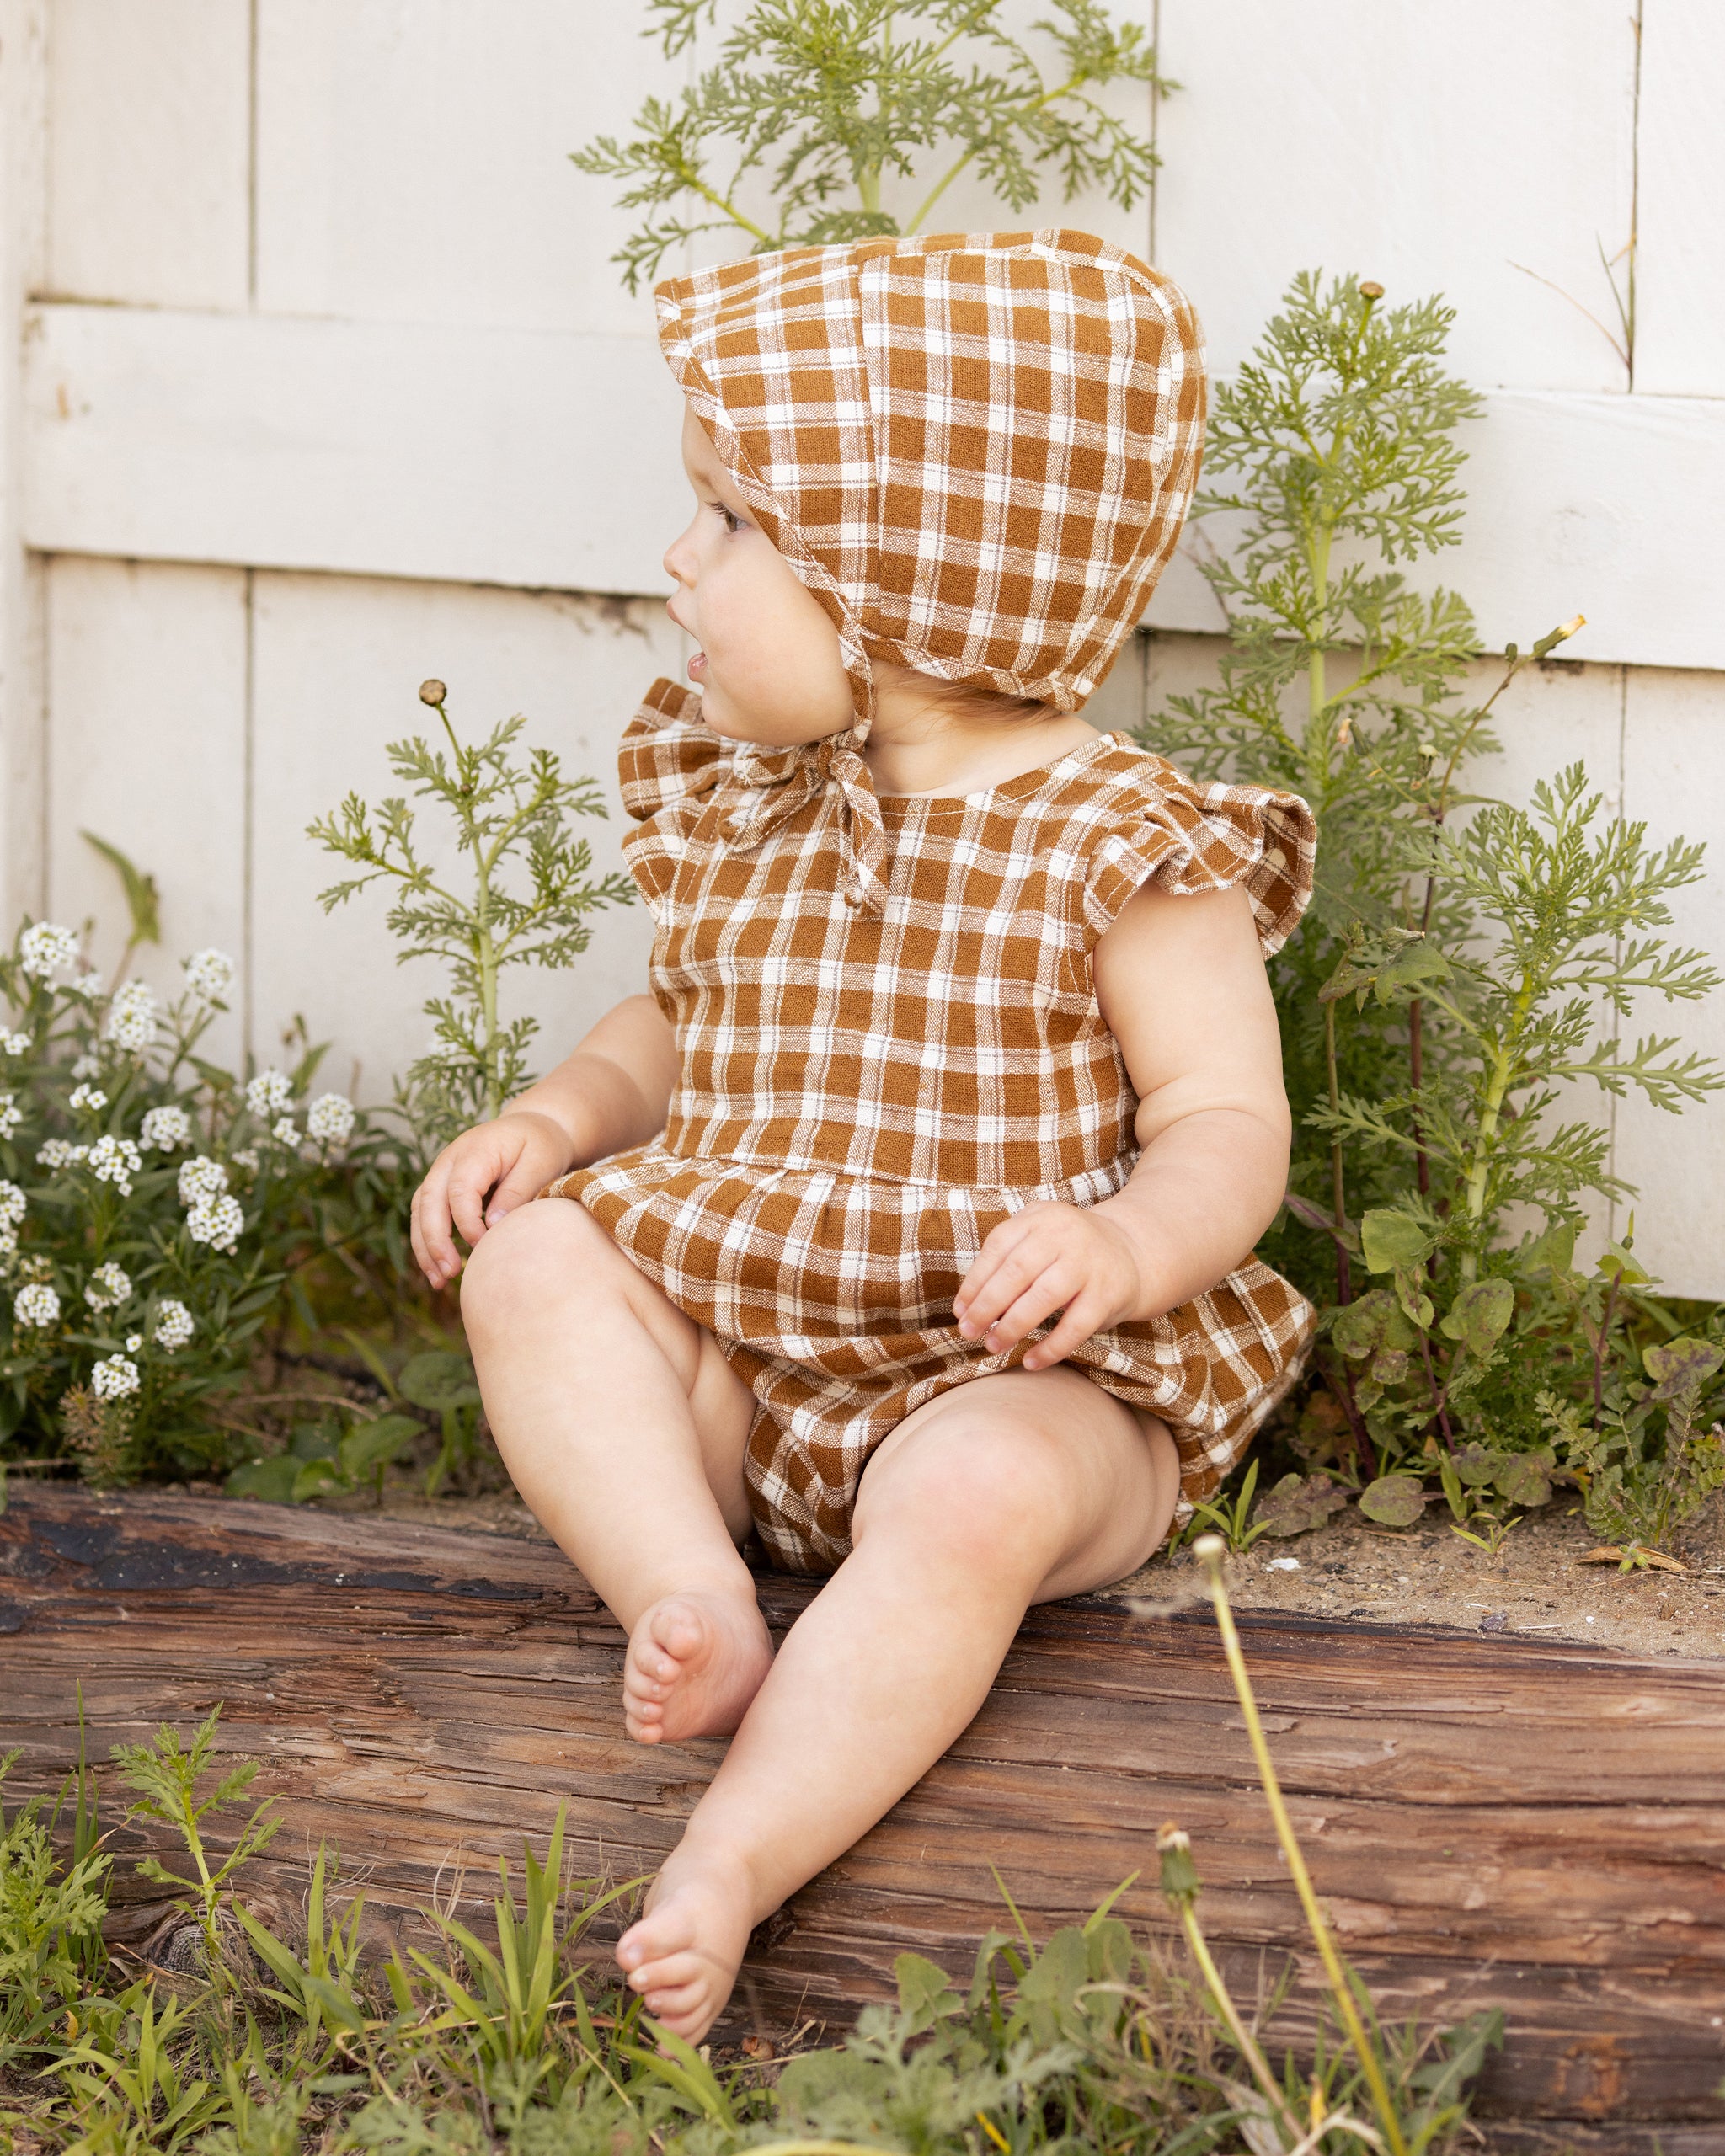 Amelia Romper || Saddle Plaid - Rylee + Cru | Kids Clothes | Trendy Baby Clothes | Modern Infant Outfits |